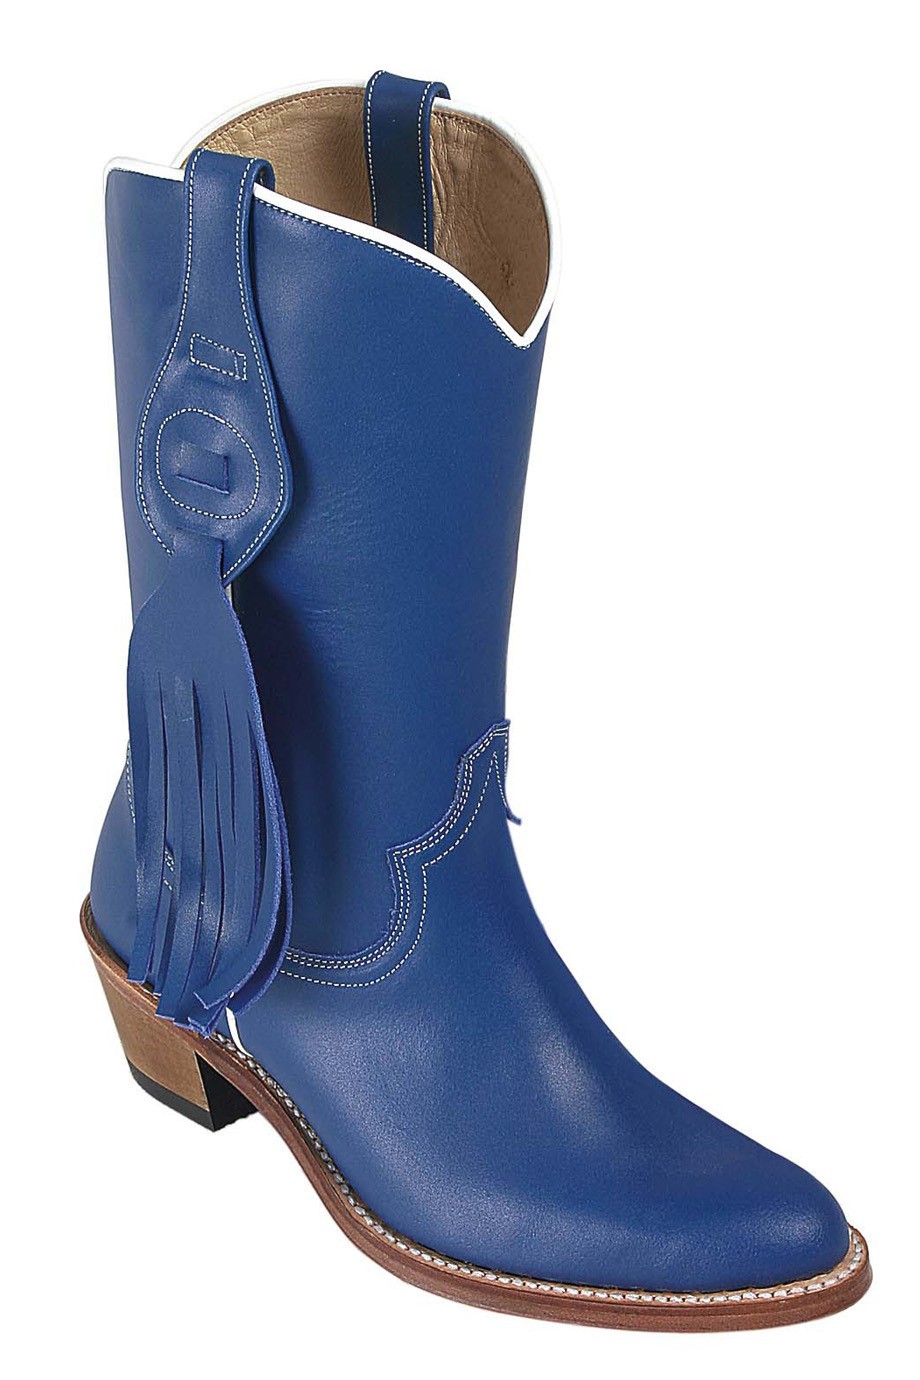 blue leather boot